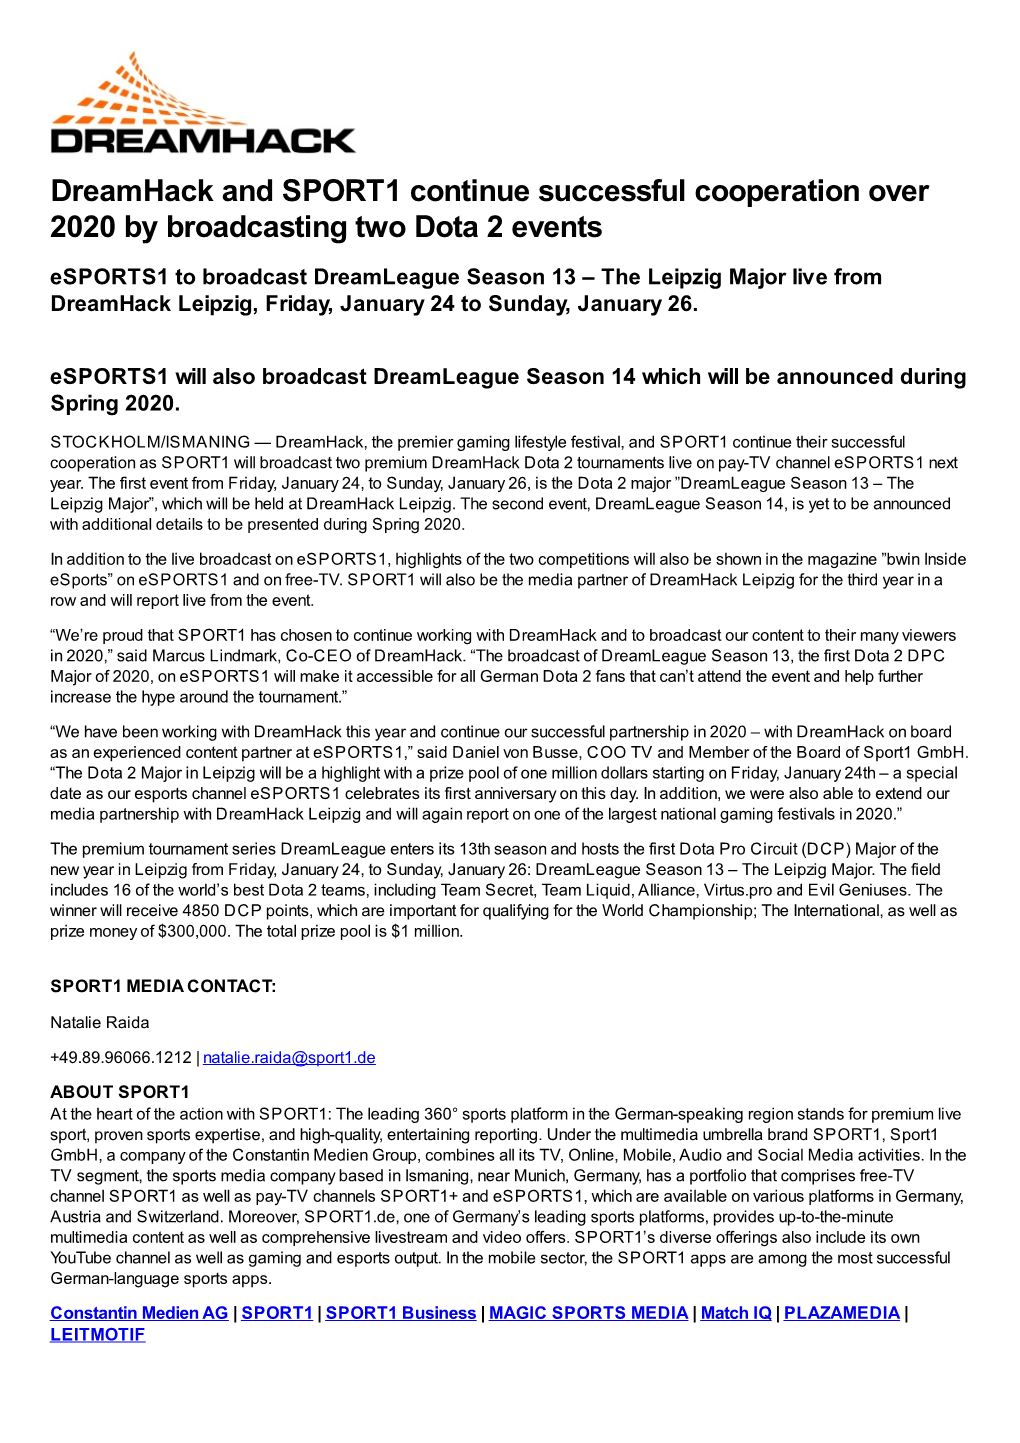 Dreamhack and SPORT1 Continue Successful Cooperation Over 2020